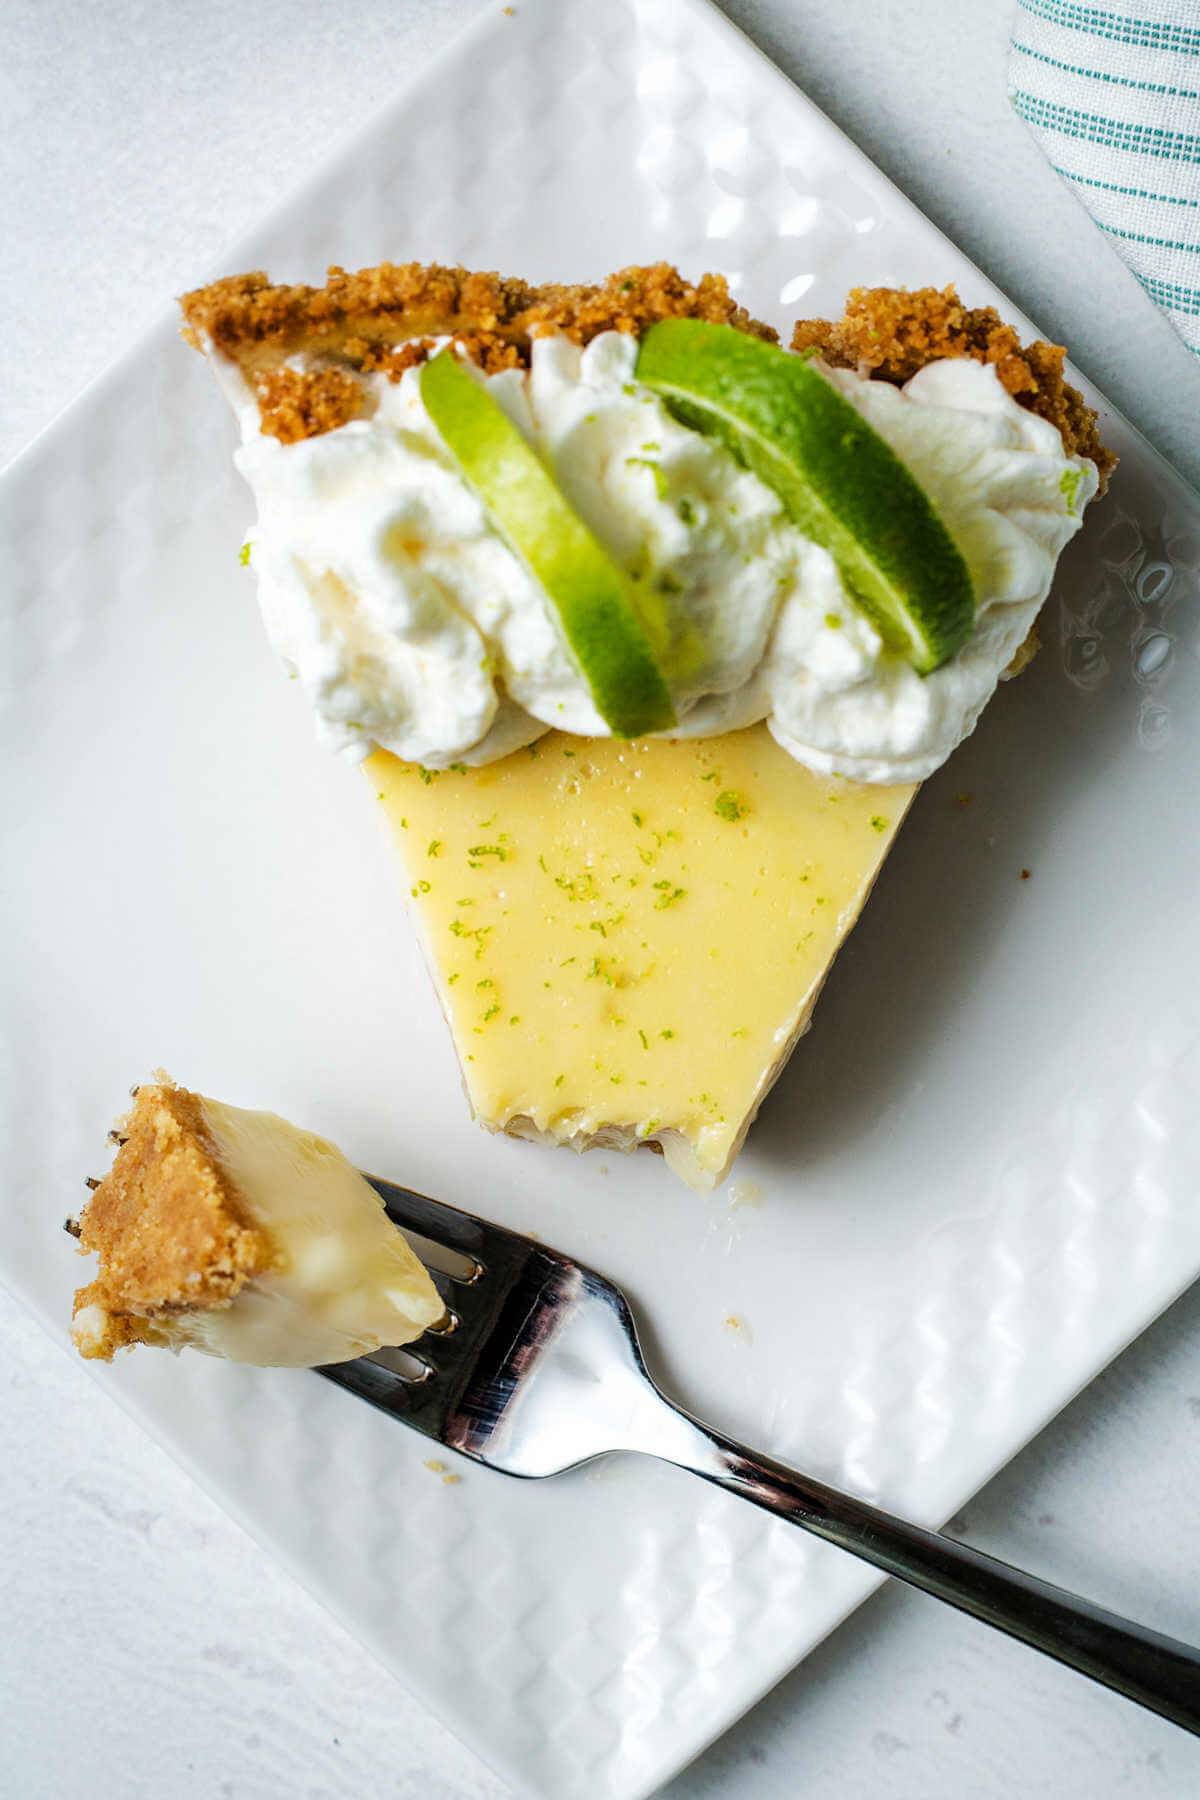 a bite of key lime pie on a fork on a plate with a piece of partially eaten pie.